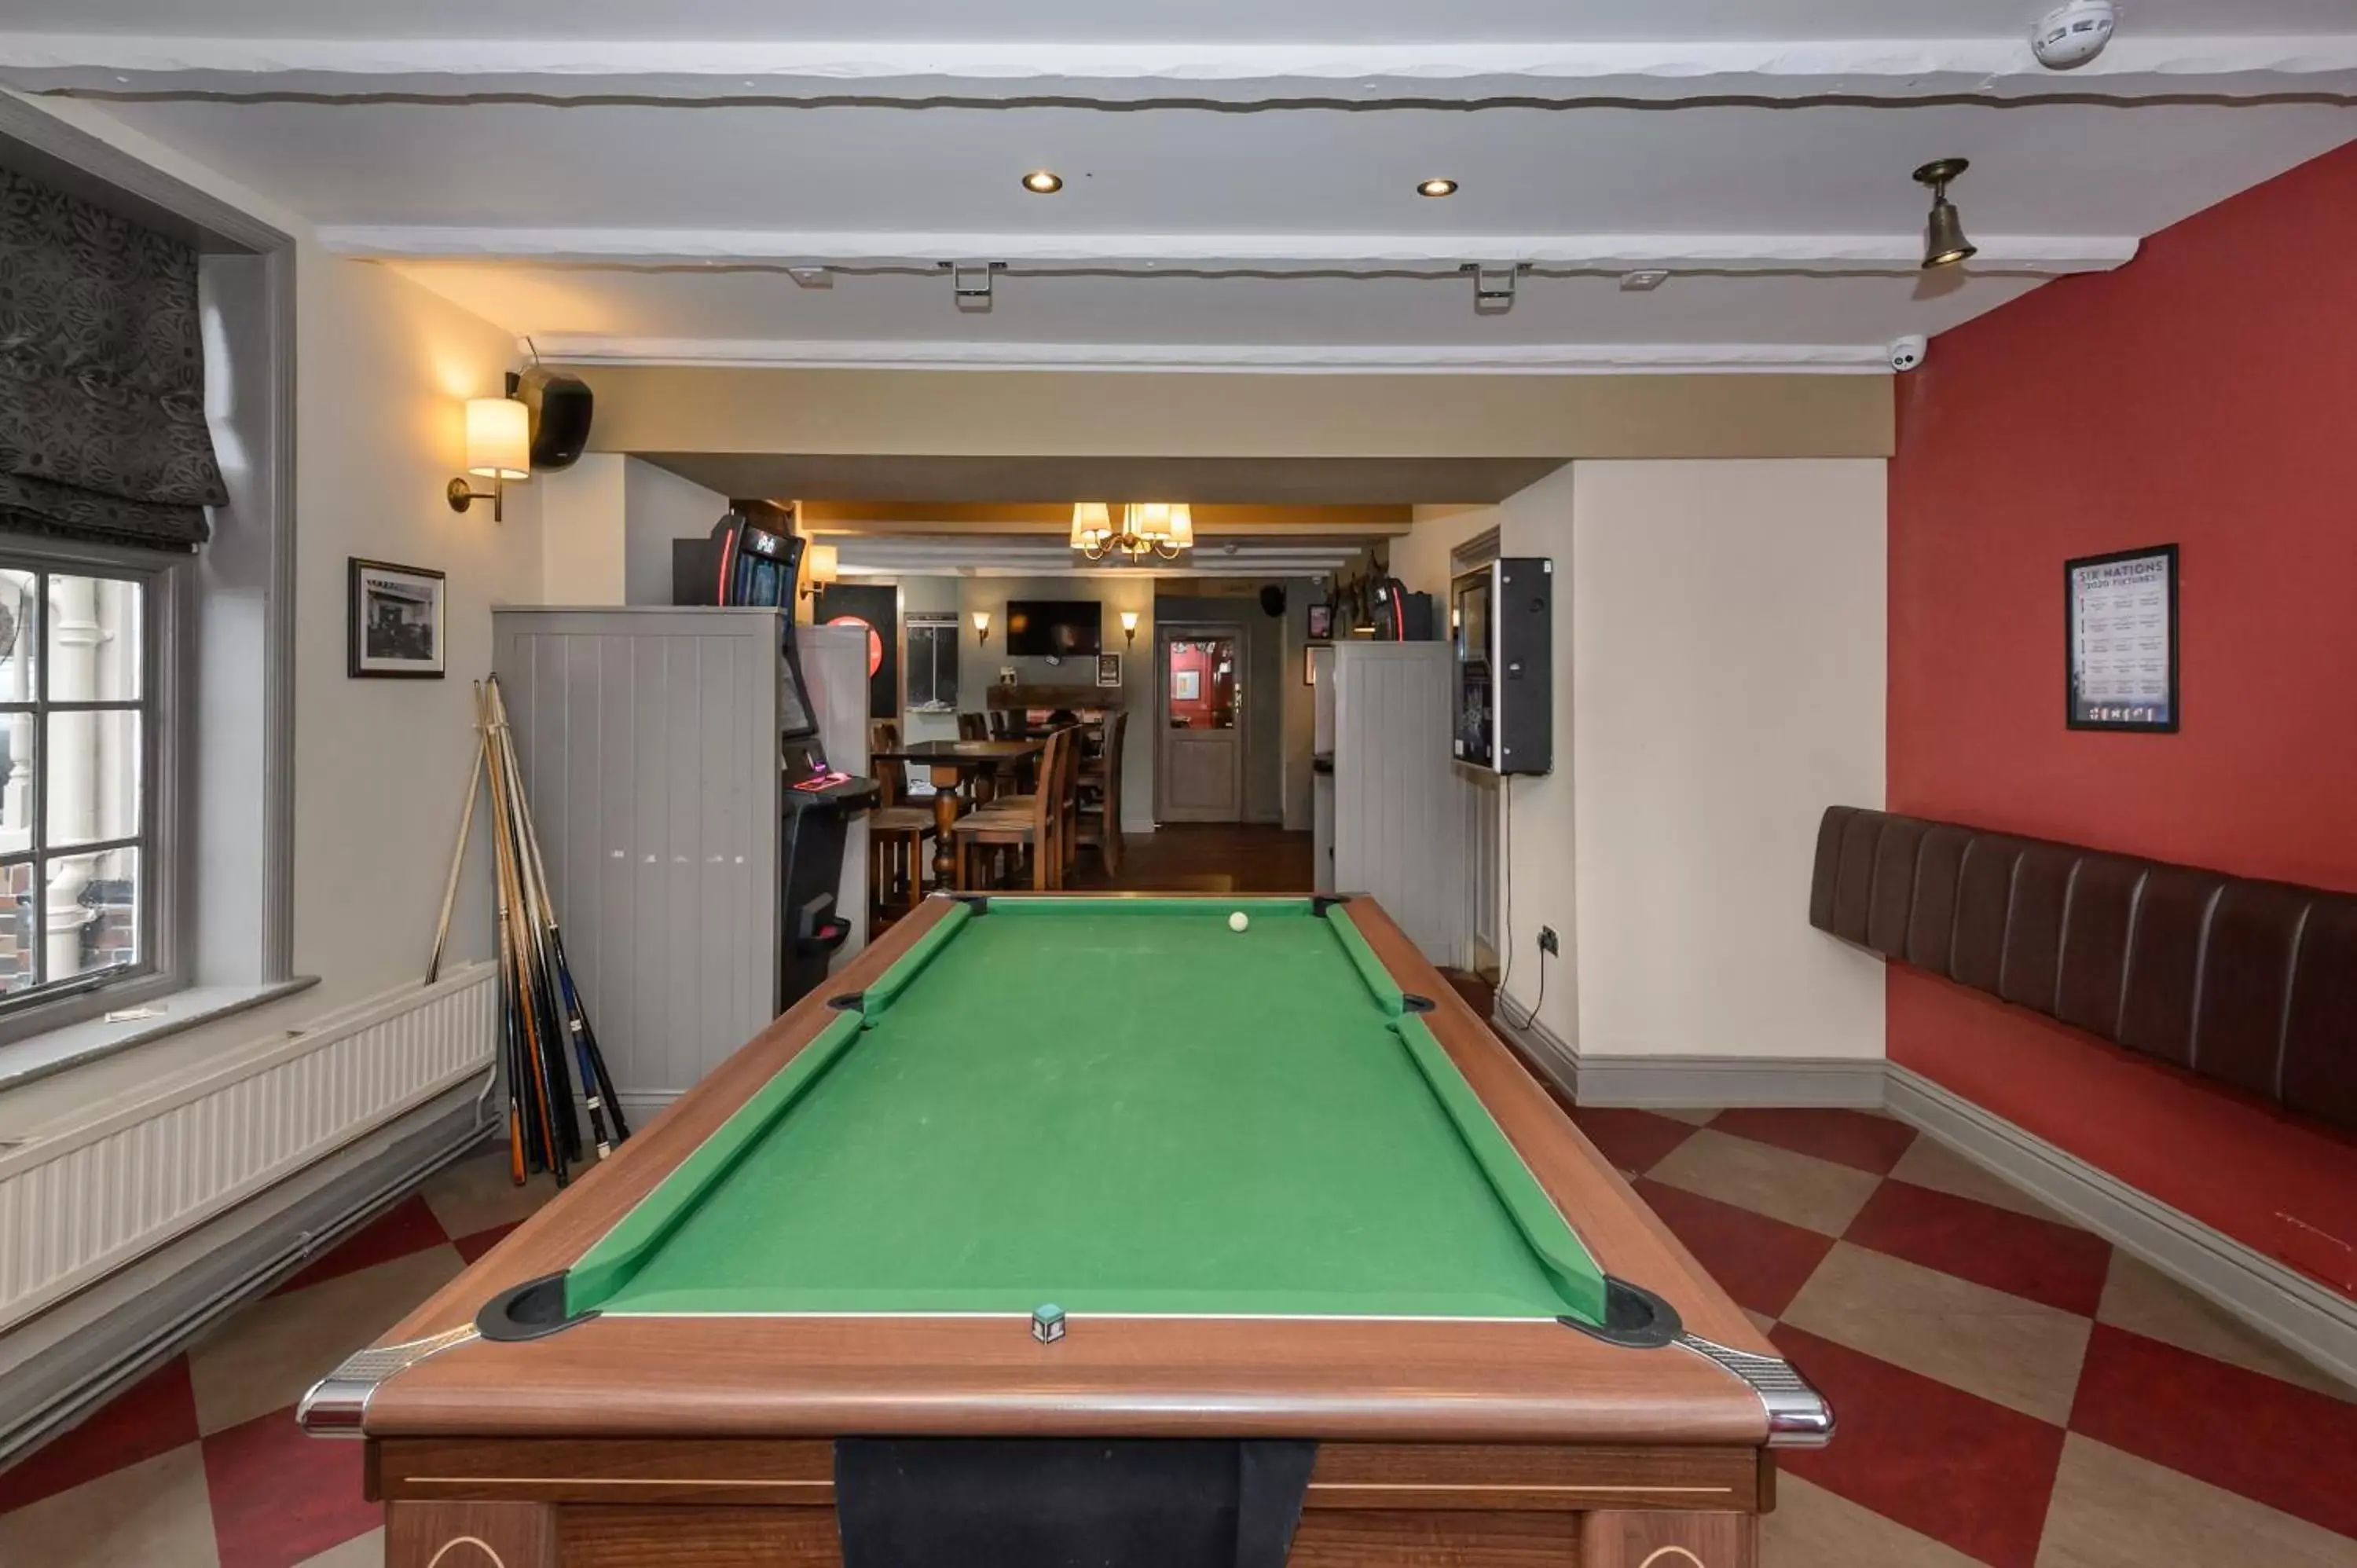 Lounge or bar, Billiards in Balfour Arms